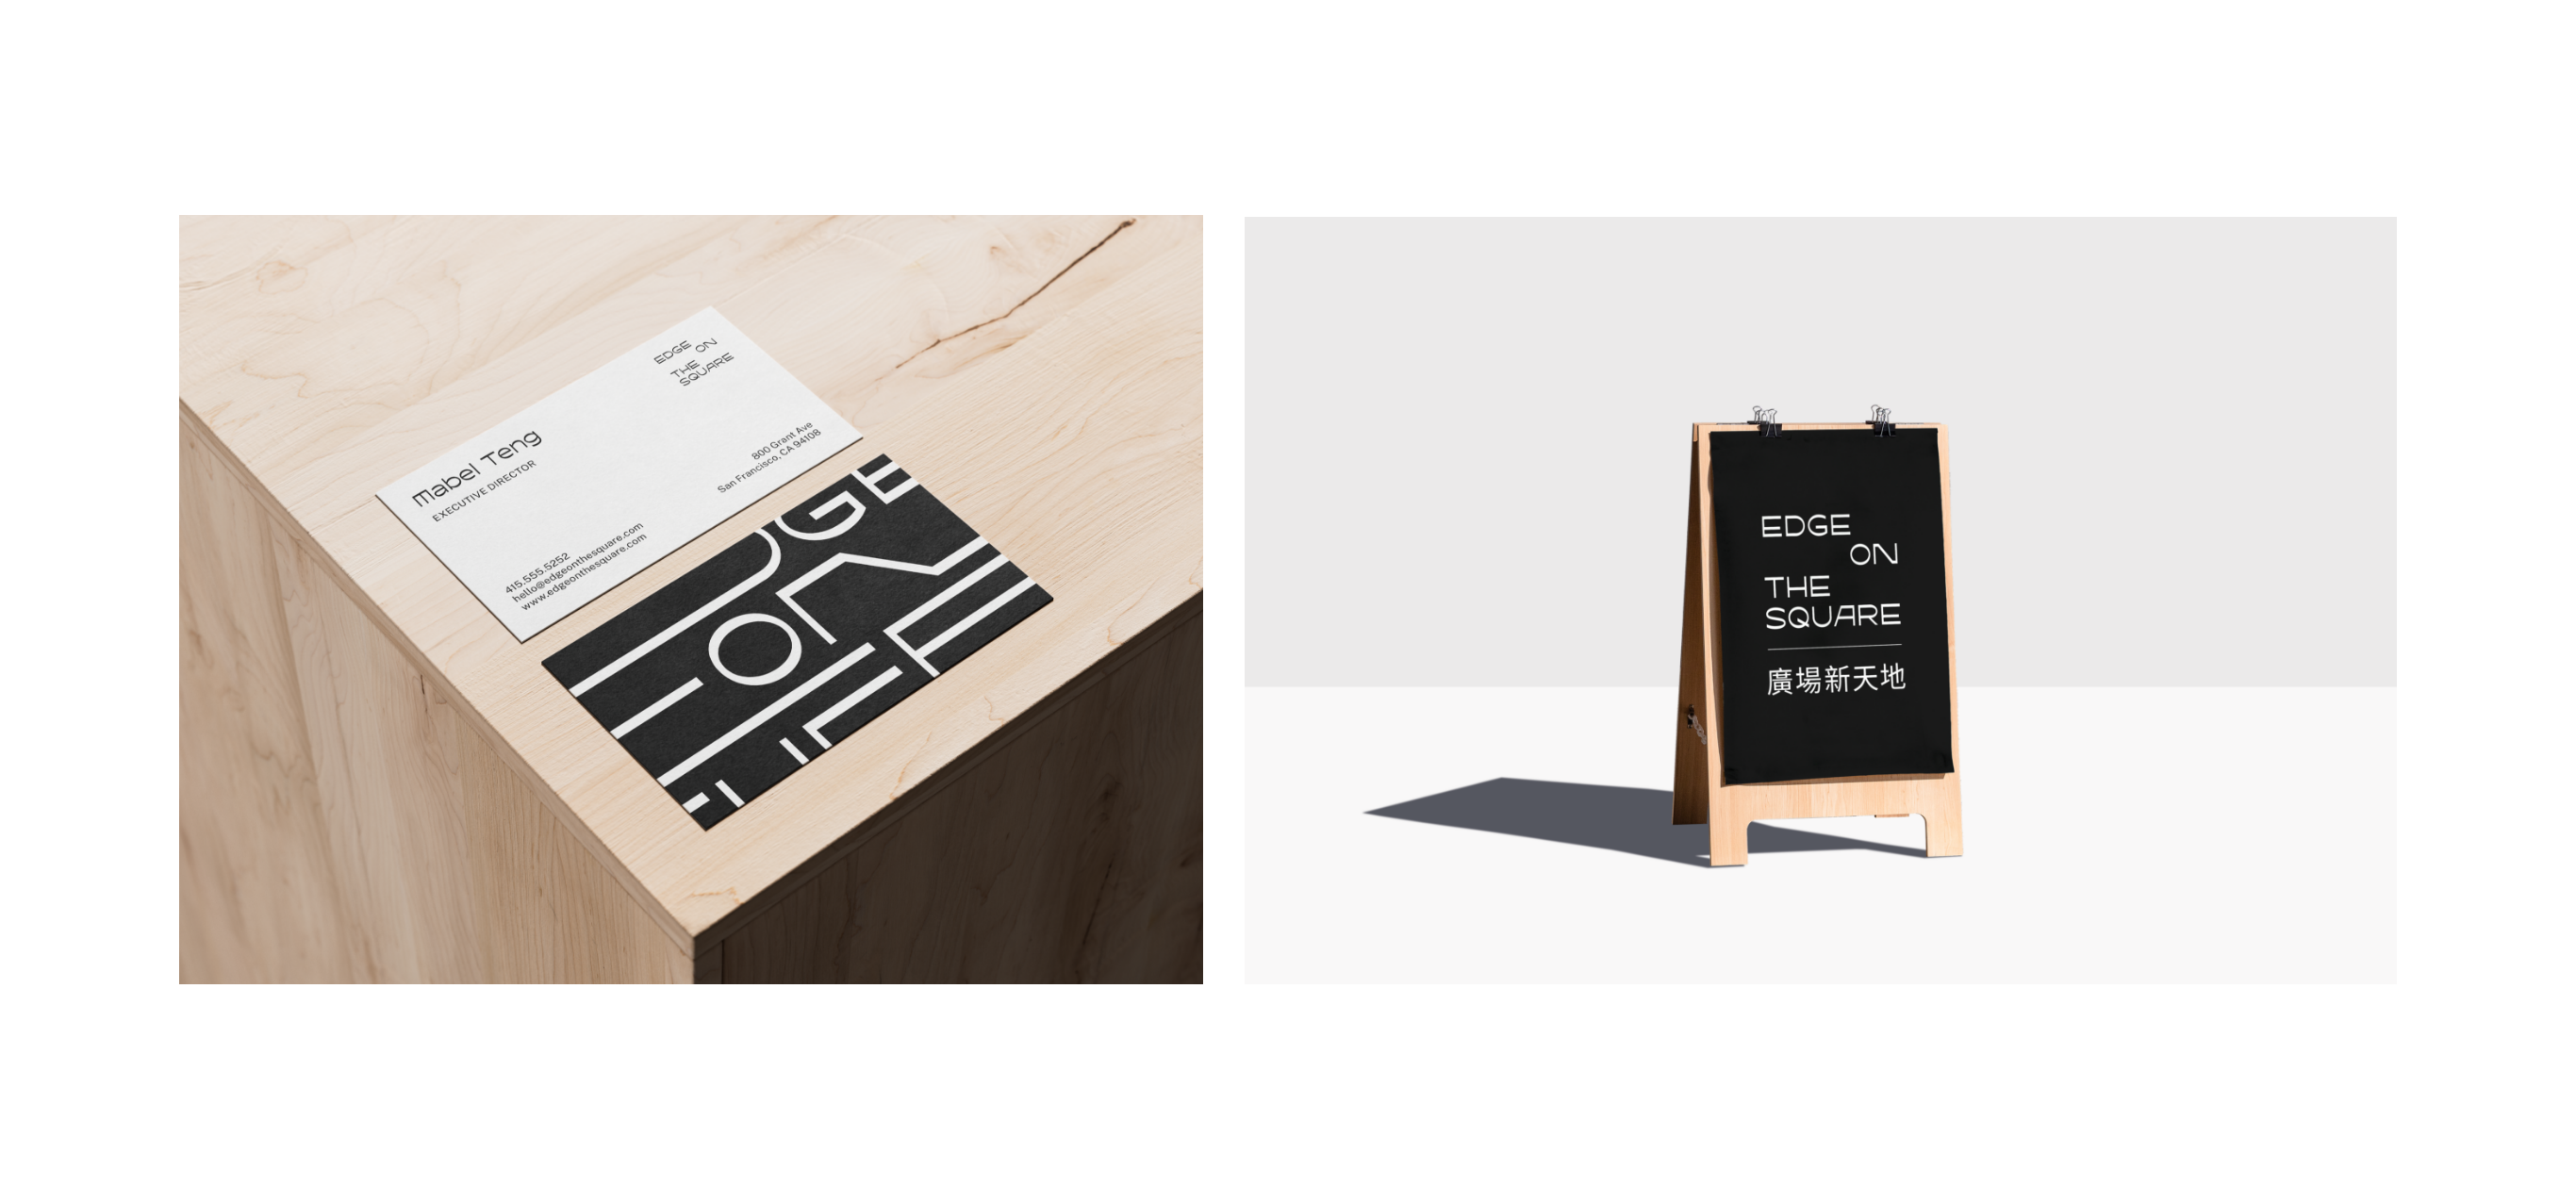 Branded Edge on The Square business cards and A-Frame sign